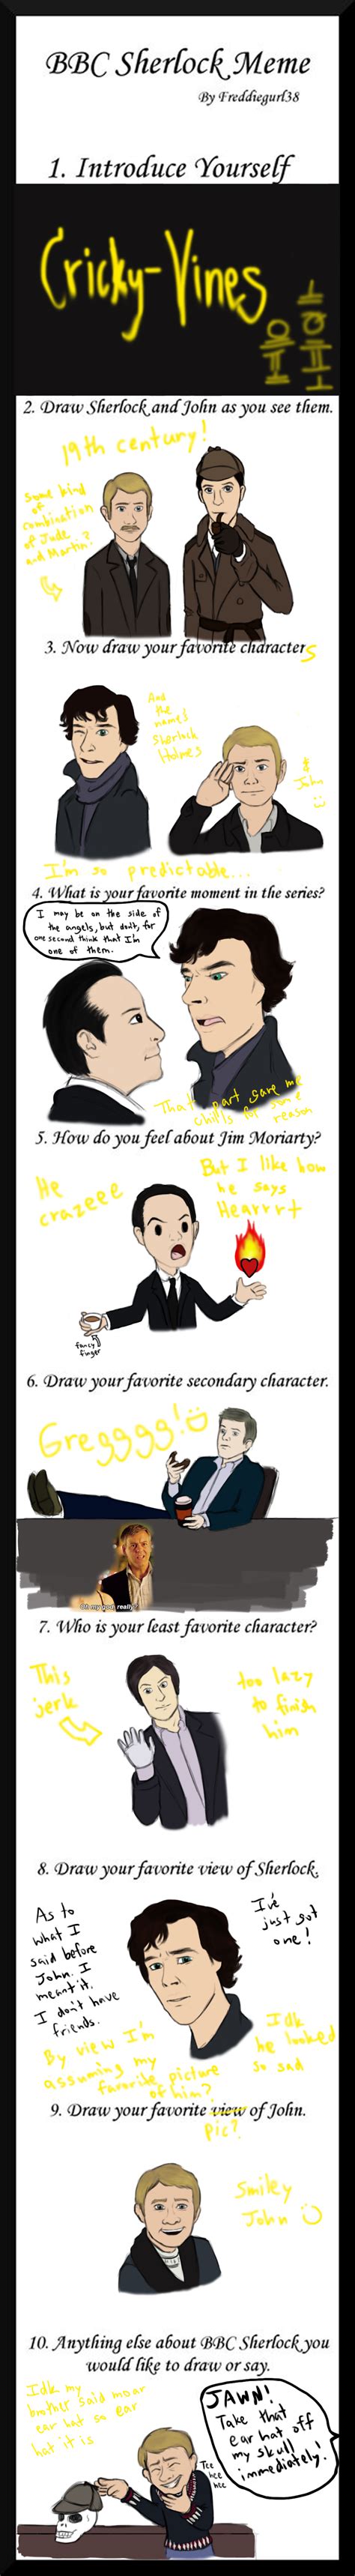 If there are any repeats that i did not catch, please do say!! BBC Sherlock Meme by Cricky-Vines on DeviantArt